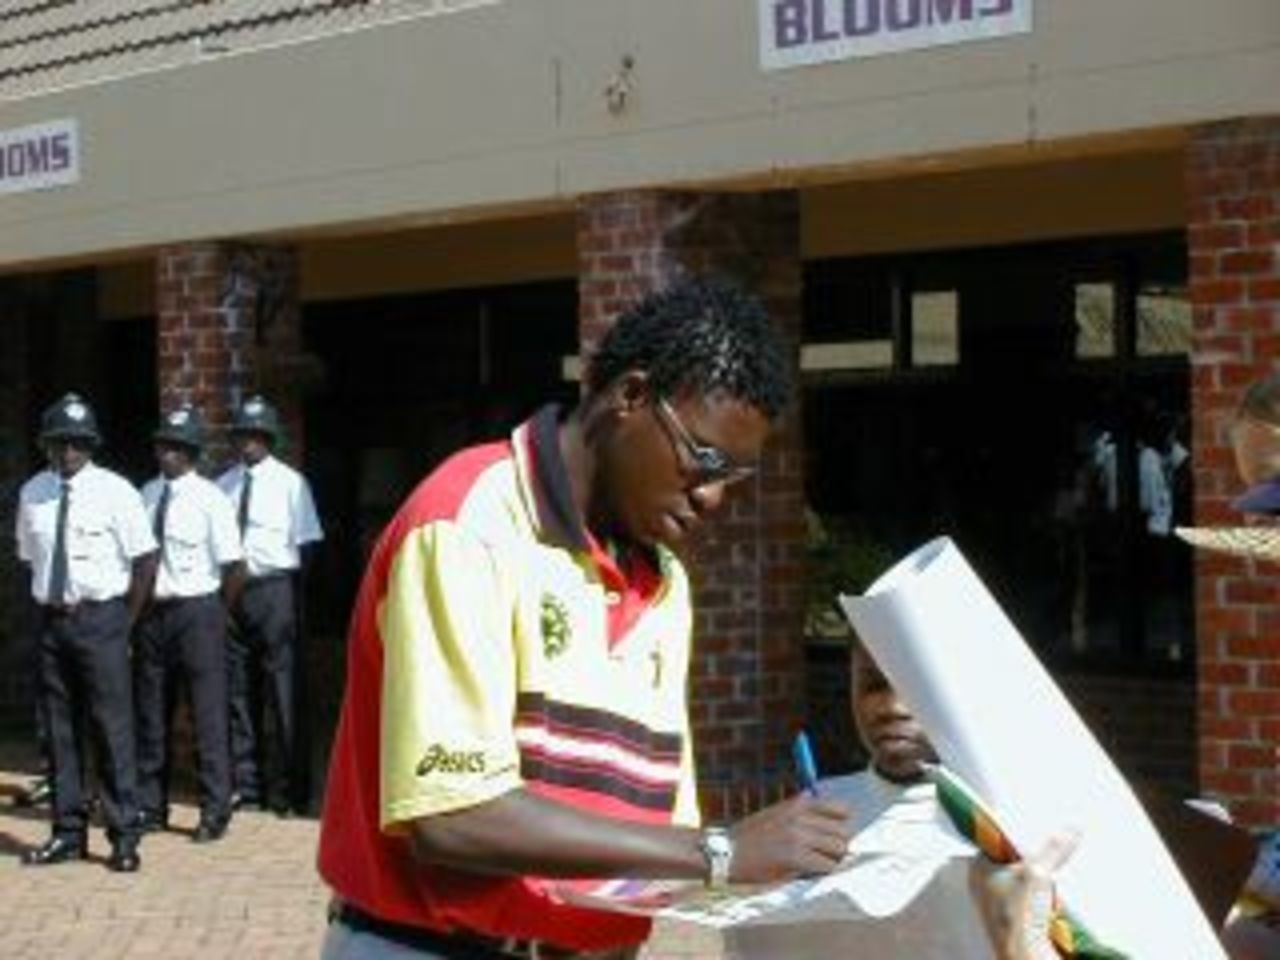 "Pom" Mbangwa signs autographs - The Zimbabwe World Cup team is welcomed home  with a parade in Harare - 19 June 1999